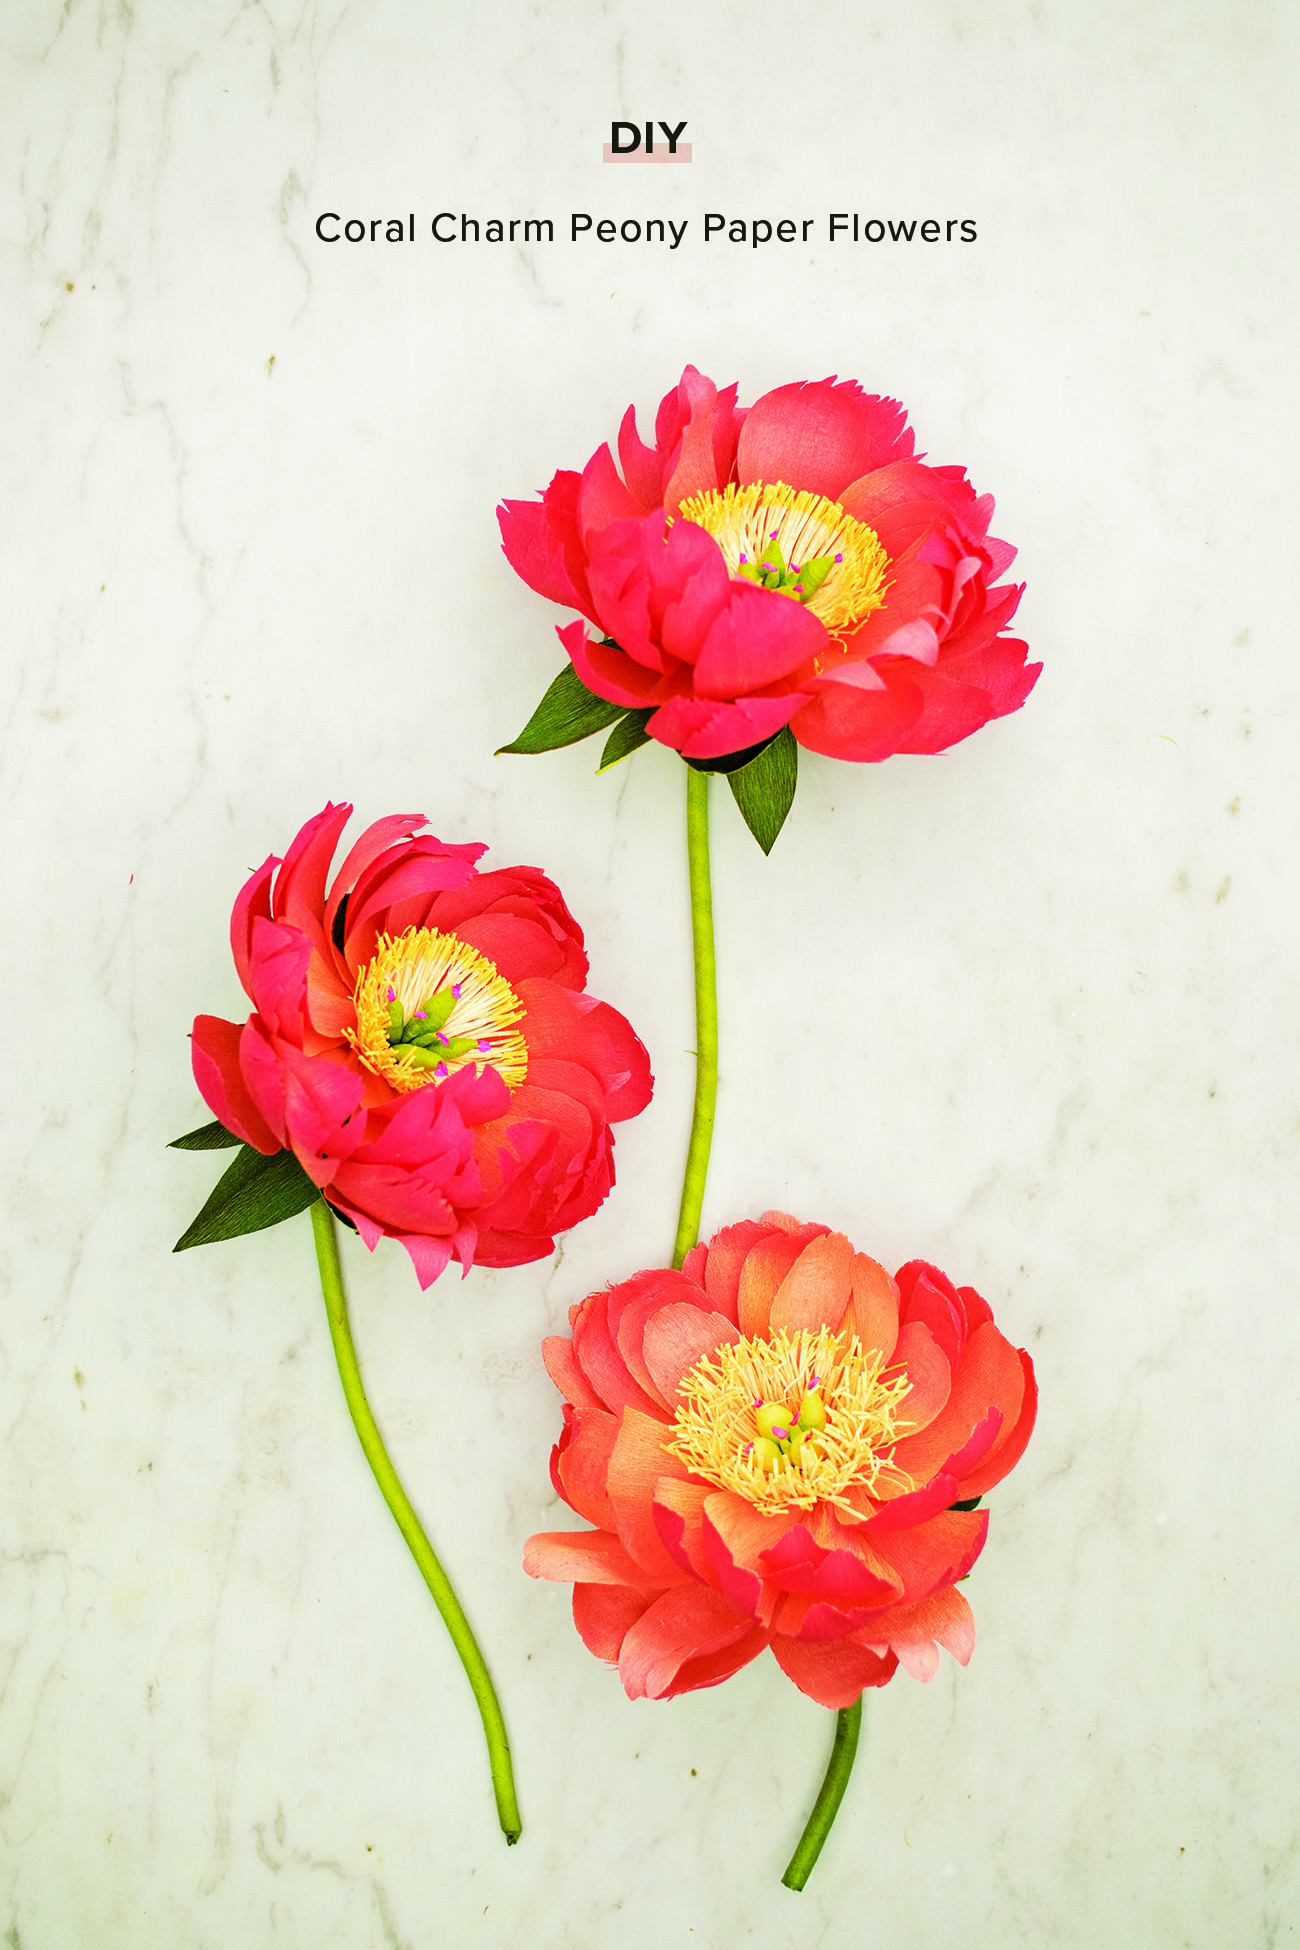 Coral Charm Peony Paper Flower DIY